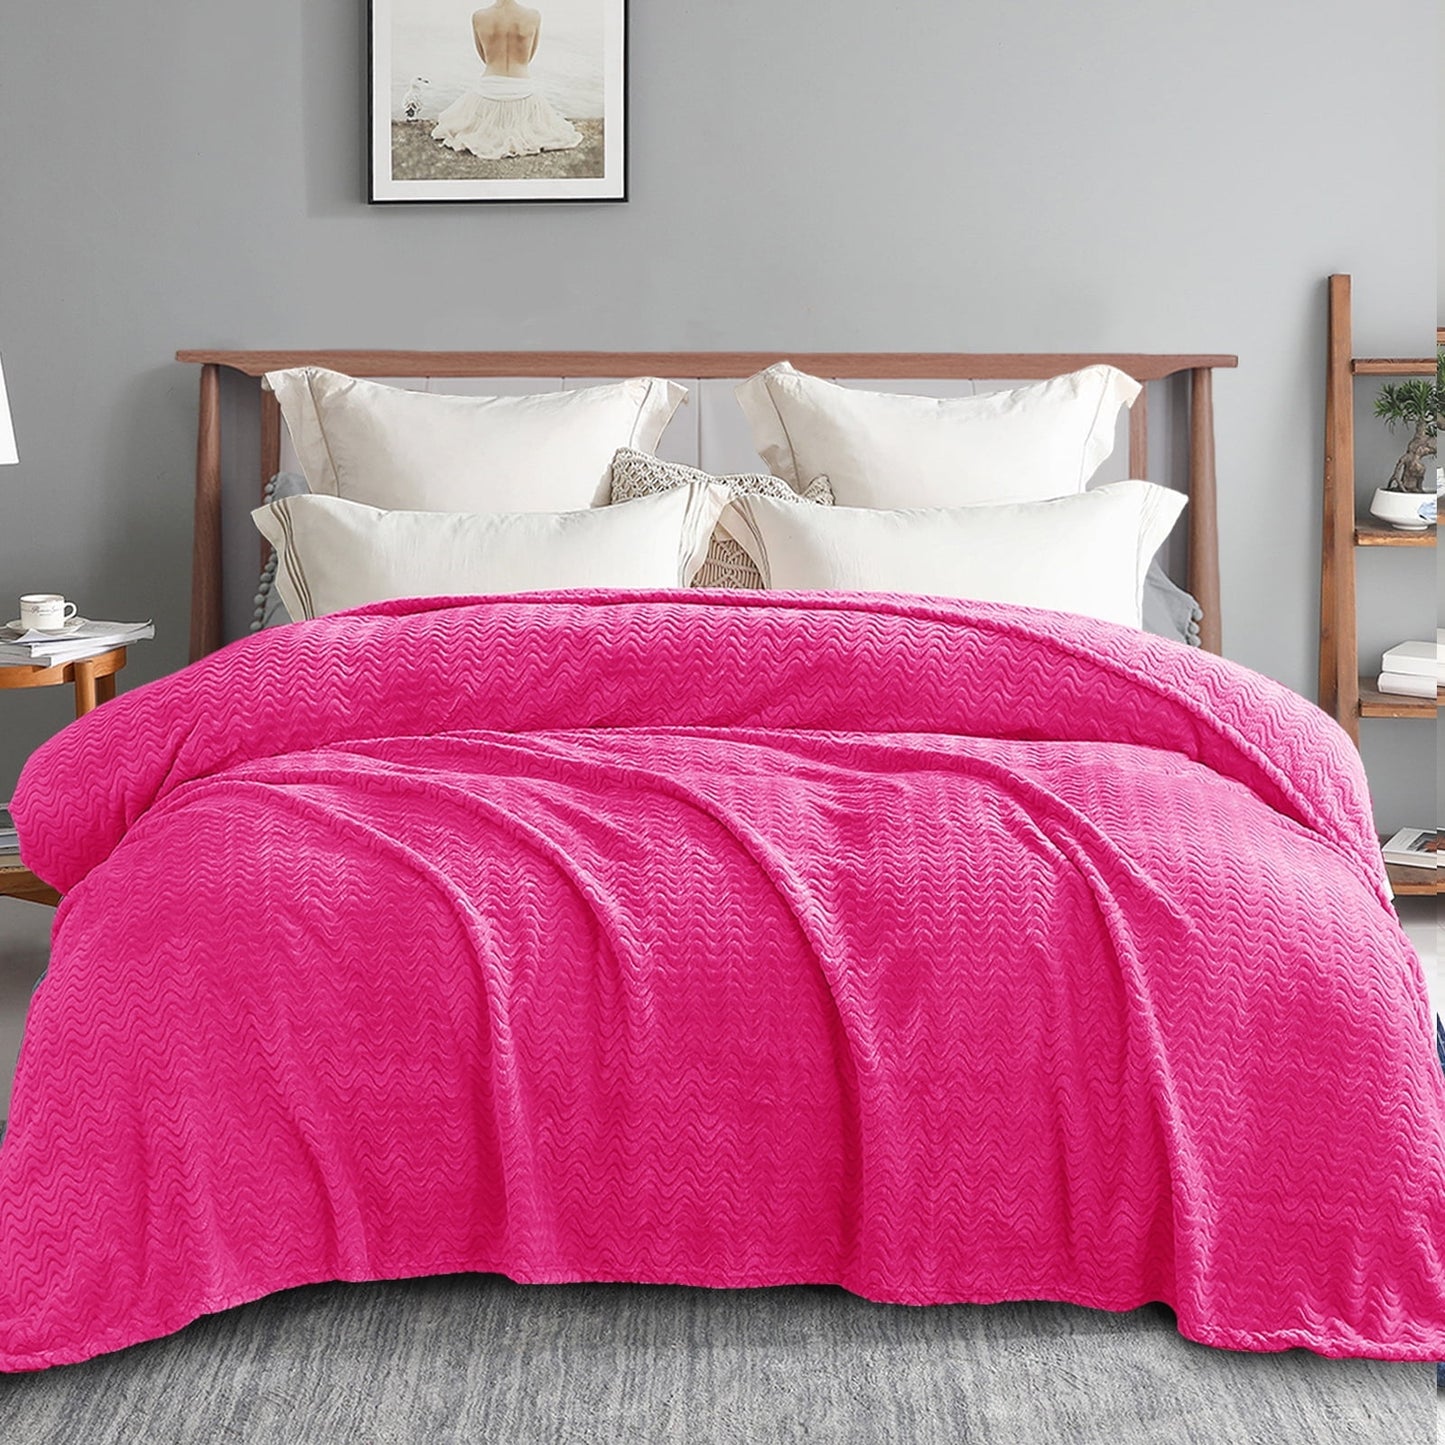 Exclusivo Mezcla Twin Size Flannel Fleece Blanket, 90x66 Inches Soft Jacquard Weave Wave Pattern Velvet Plush Blanket for Bed, Cozy, Warm, Lightweight and Decorative Hot Pink Blanket